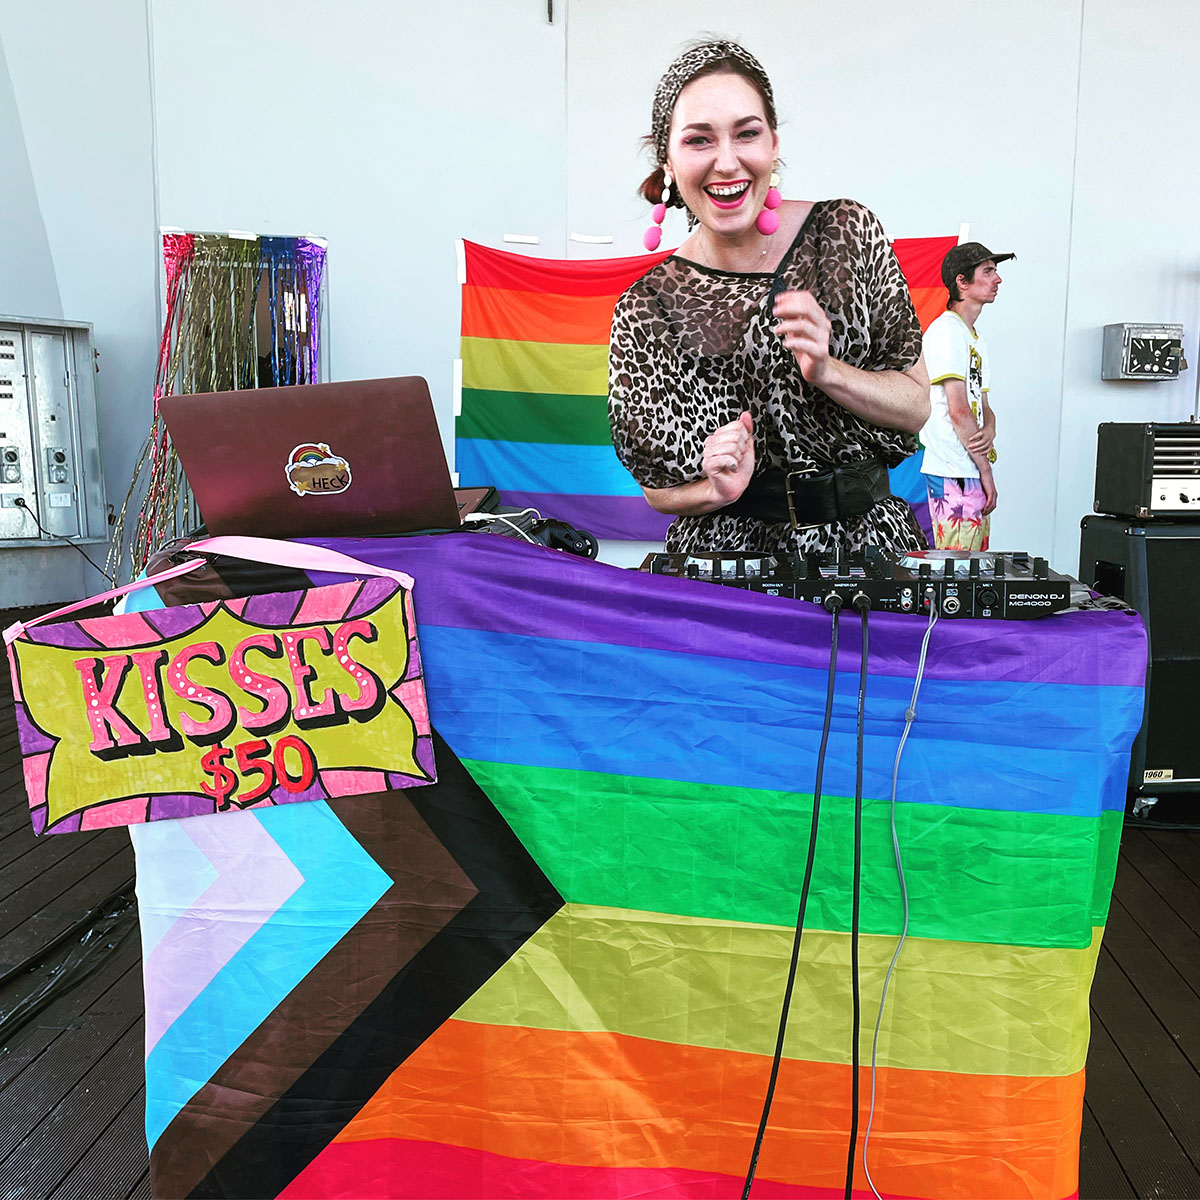 A fun pic of Ginger LaMinge wearing a leopard print in front of the Progress Pride Flag and a sign that says 'KISSES $50'